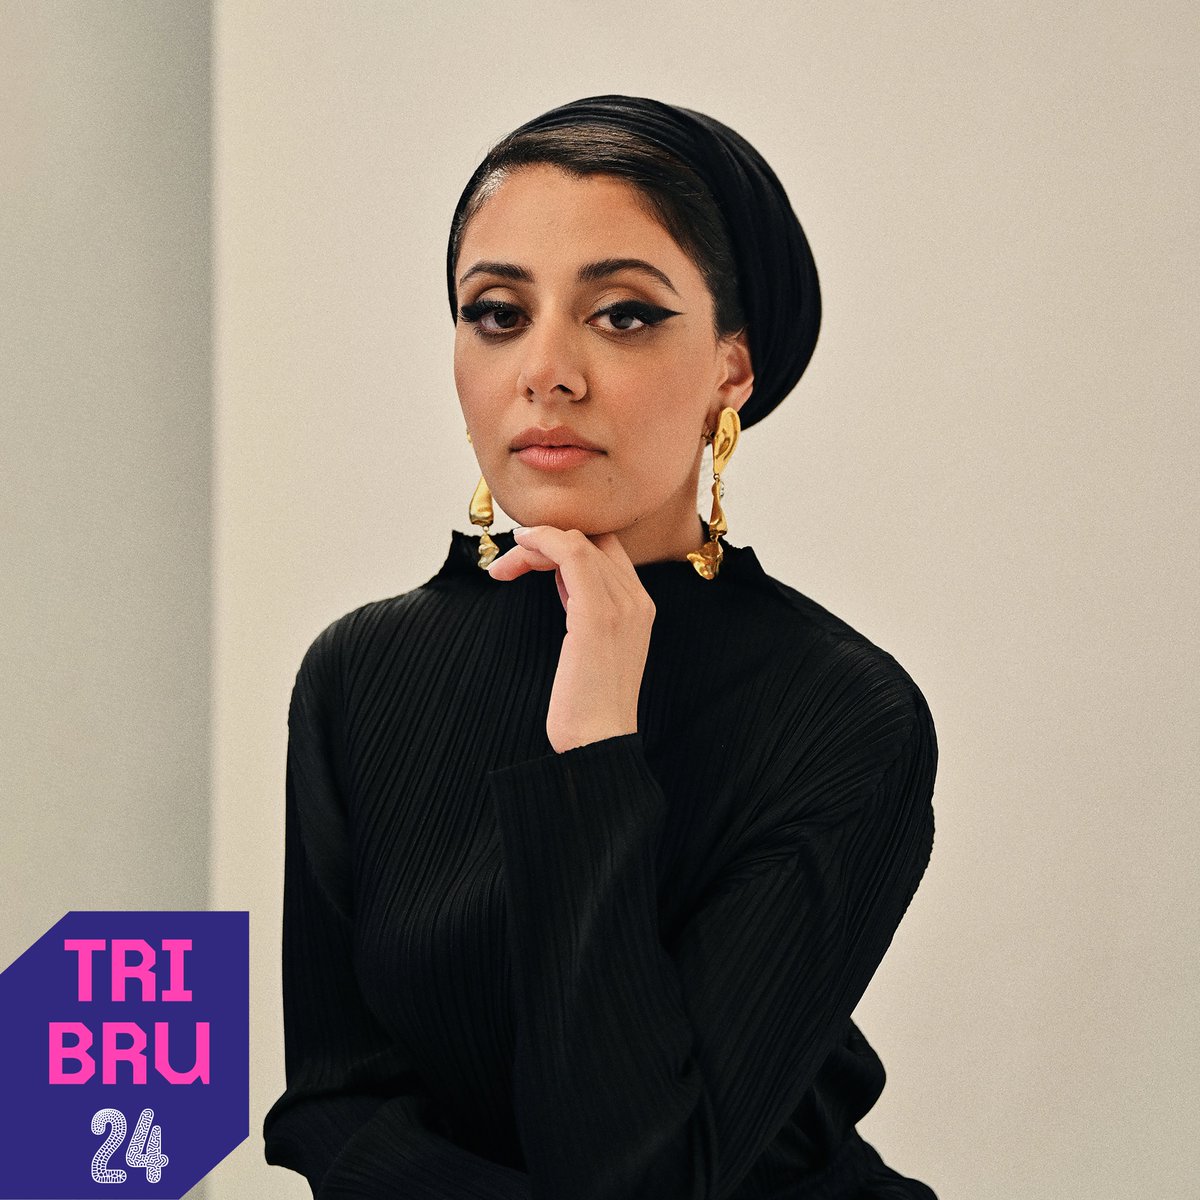 We're delighted to share that Sumayya Vally has been invited to participate in the 4th edition of the Bruges Triennial – Spaces of Possibility, curated by Shendy Gardin and Sevie Tsampalla. #TRIBRU24 #spacesofpossibility More here: triennalebrugge.be/en/programme